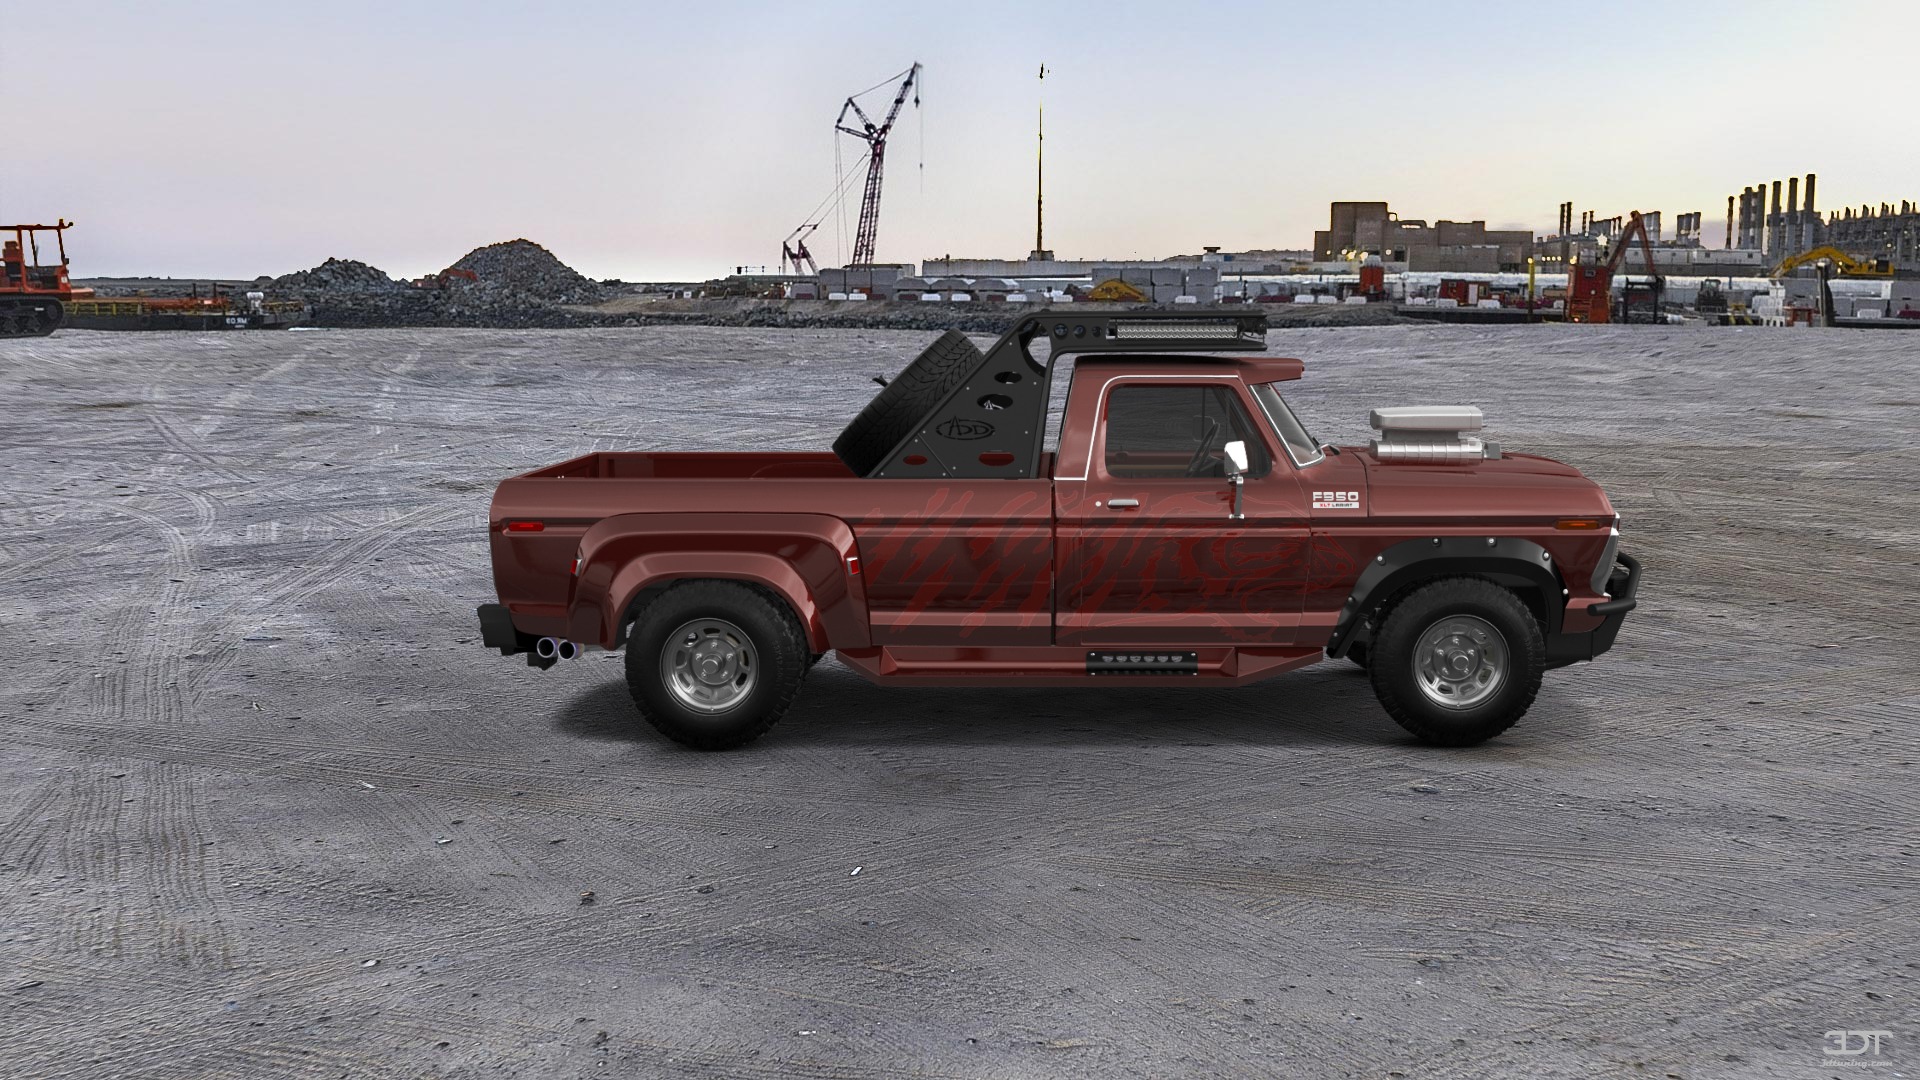 Ford F-350 Dually 2 Door pickup truck 1974